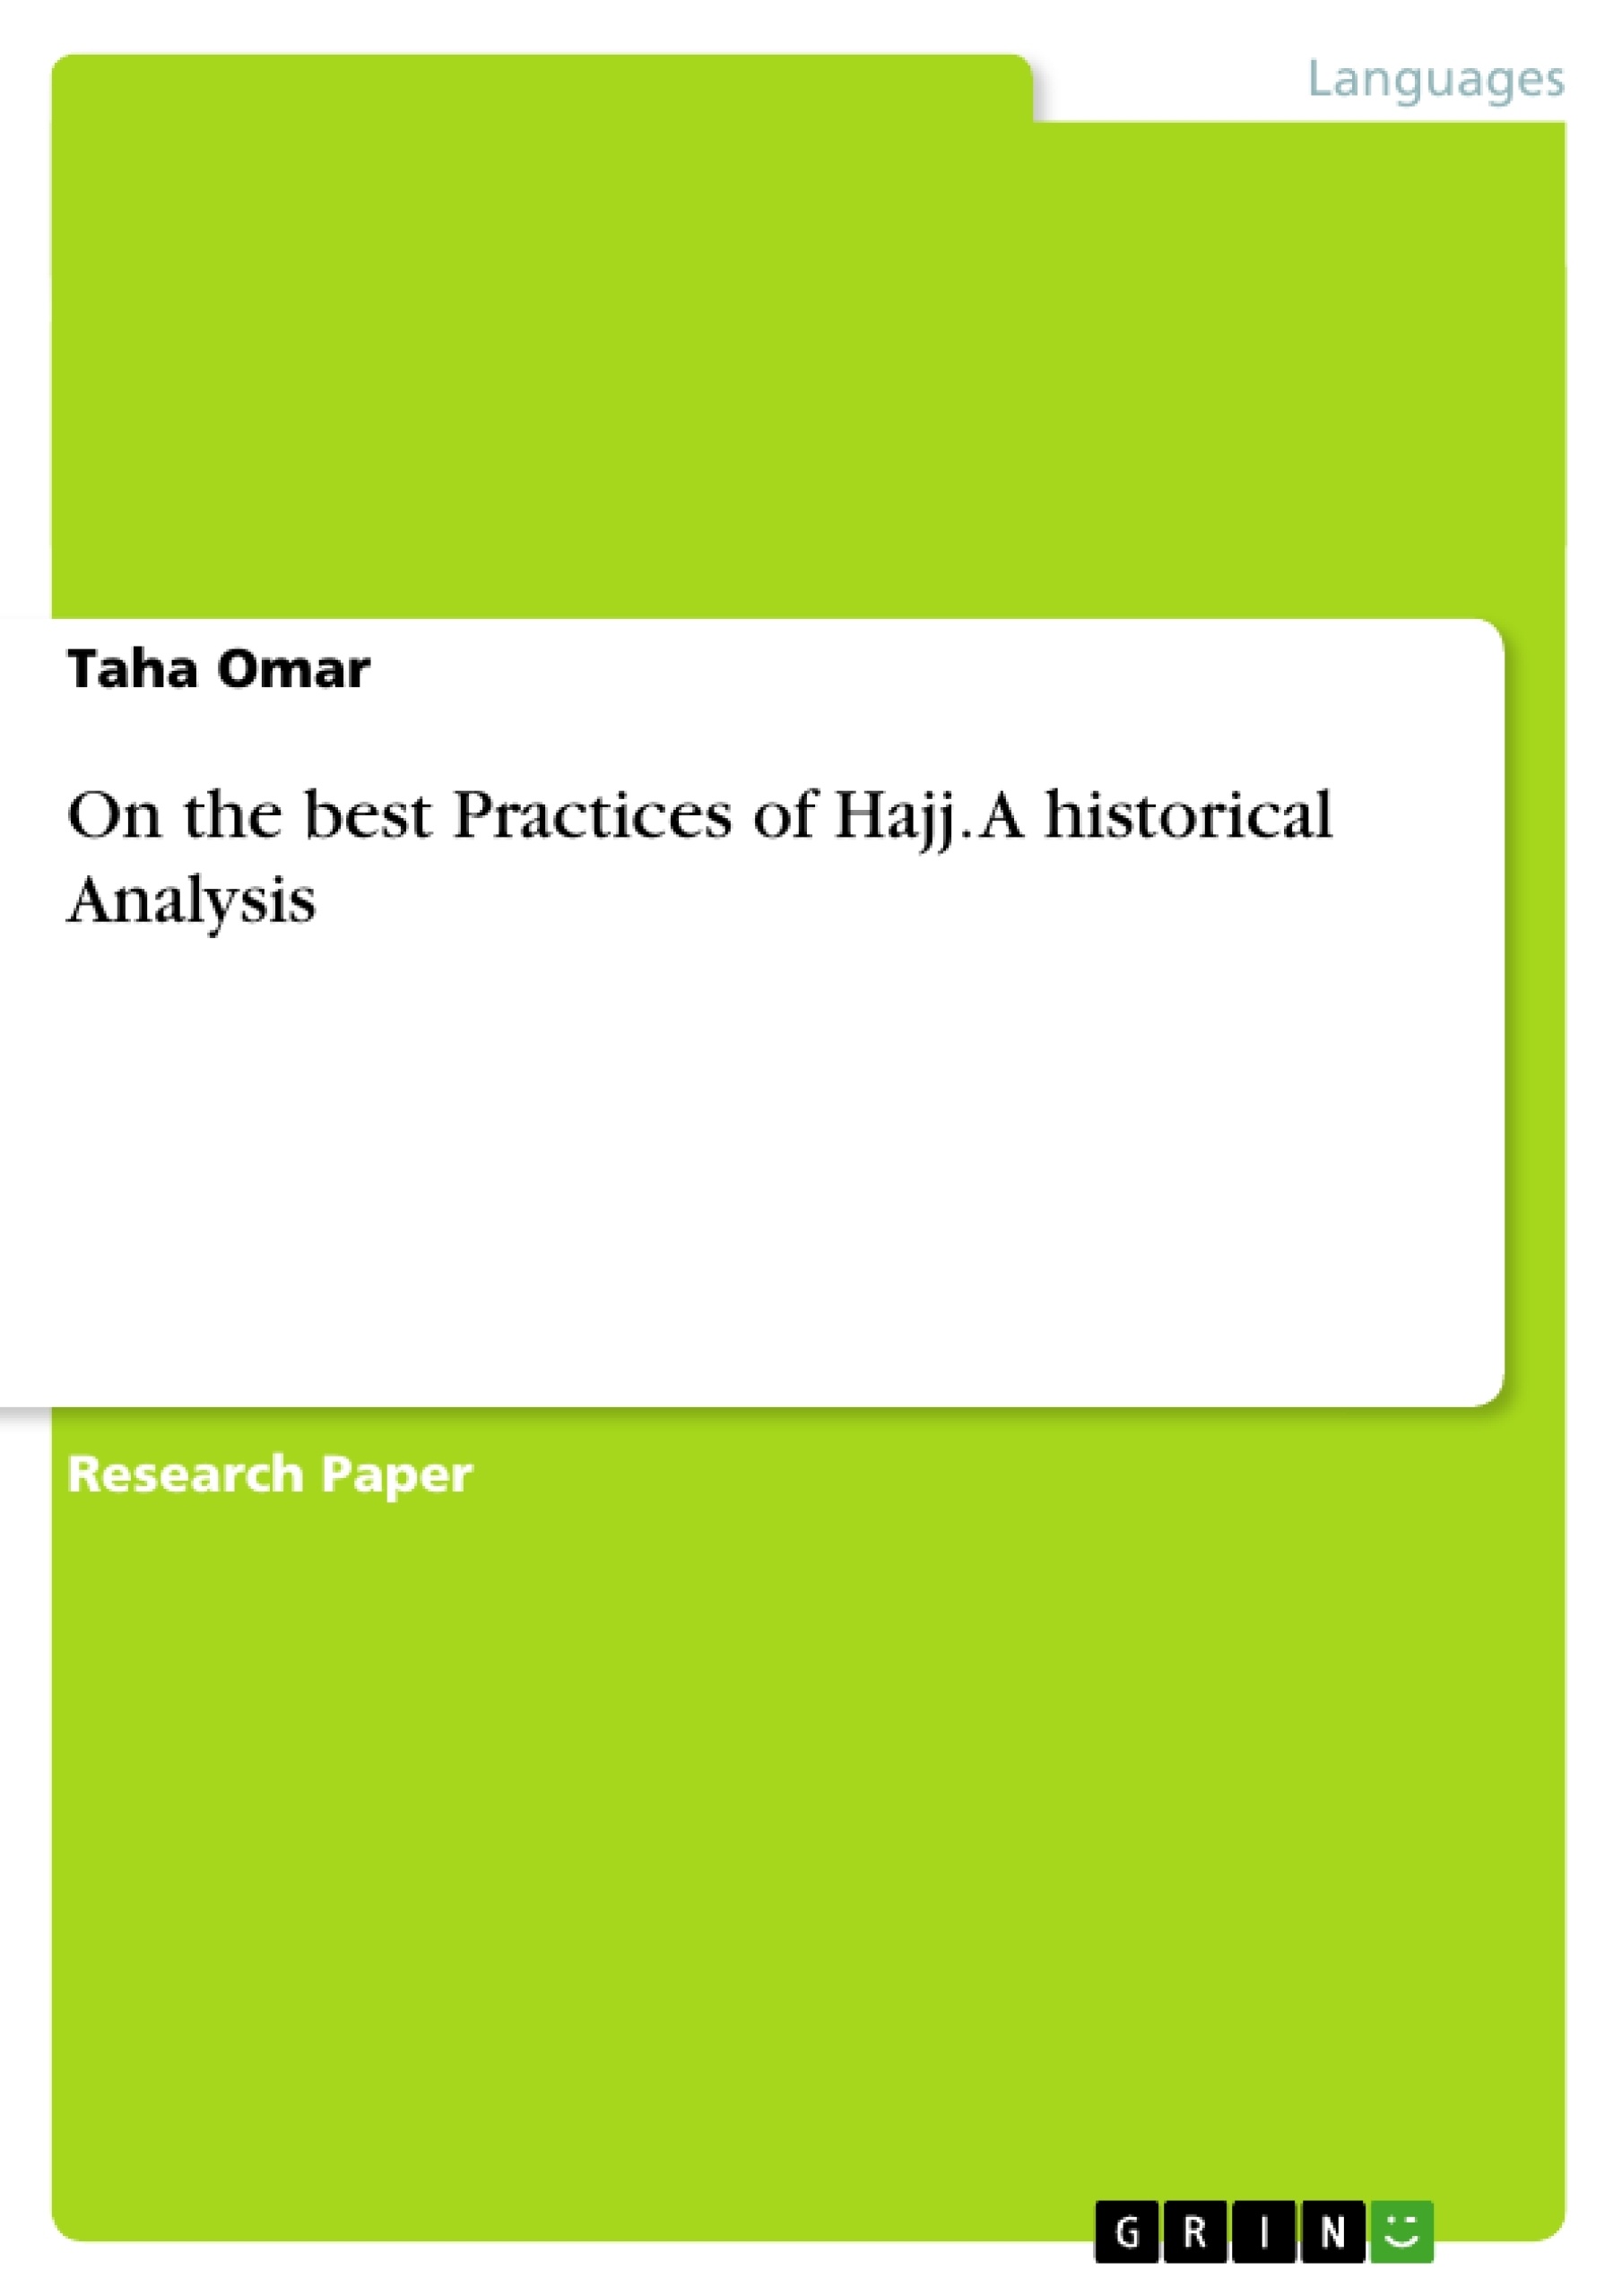 Titel: On the best Practices of Hajj. A historical Analysis